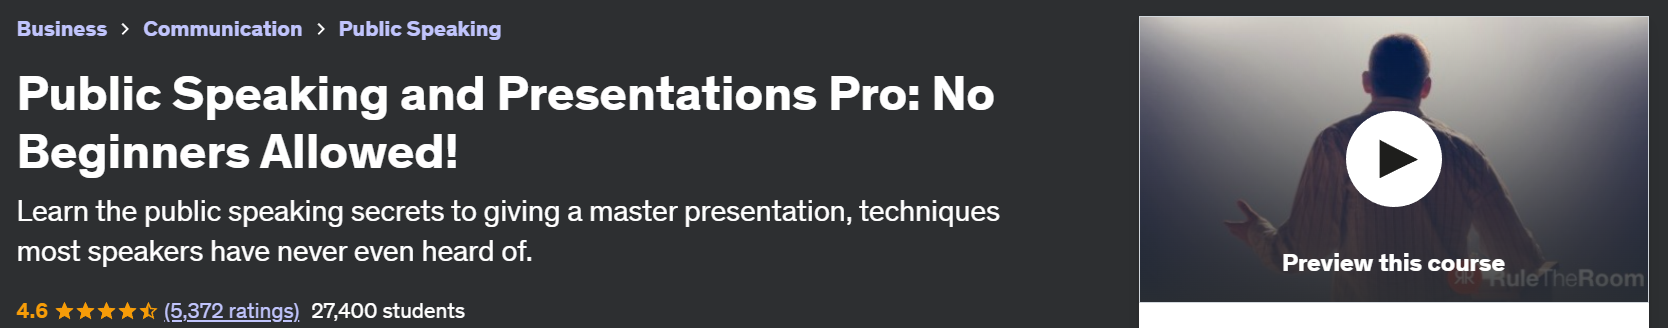 Public Speaking and Presentations Pro